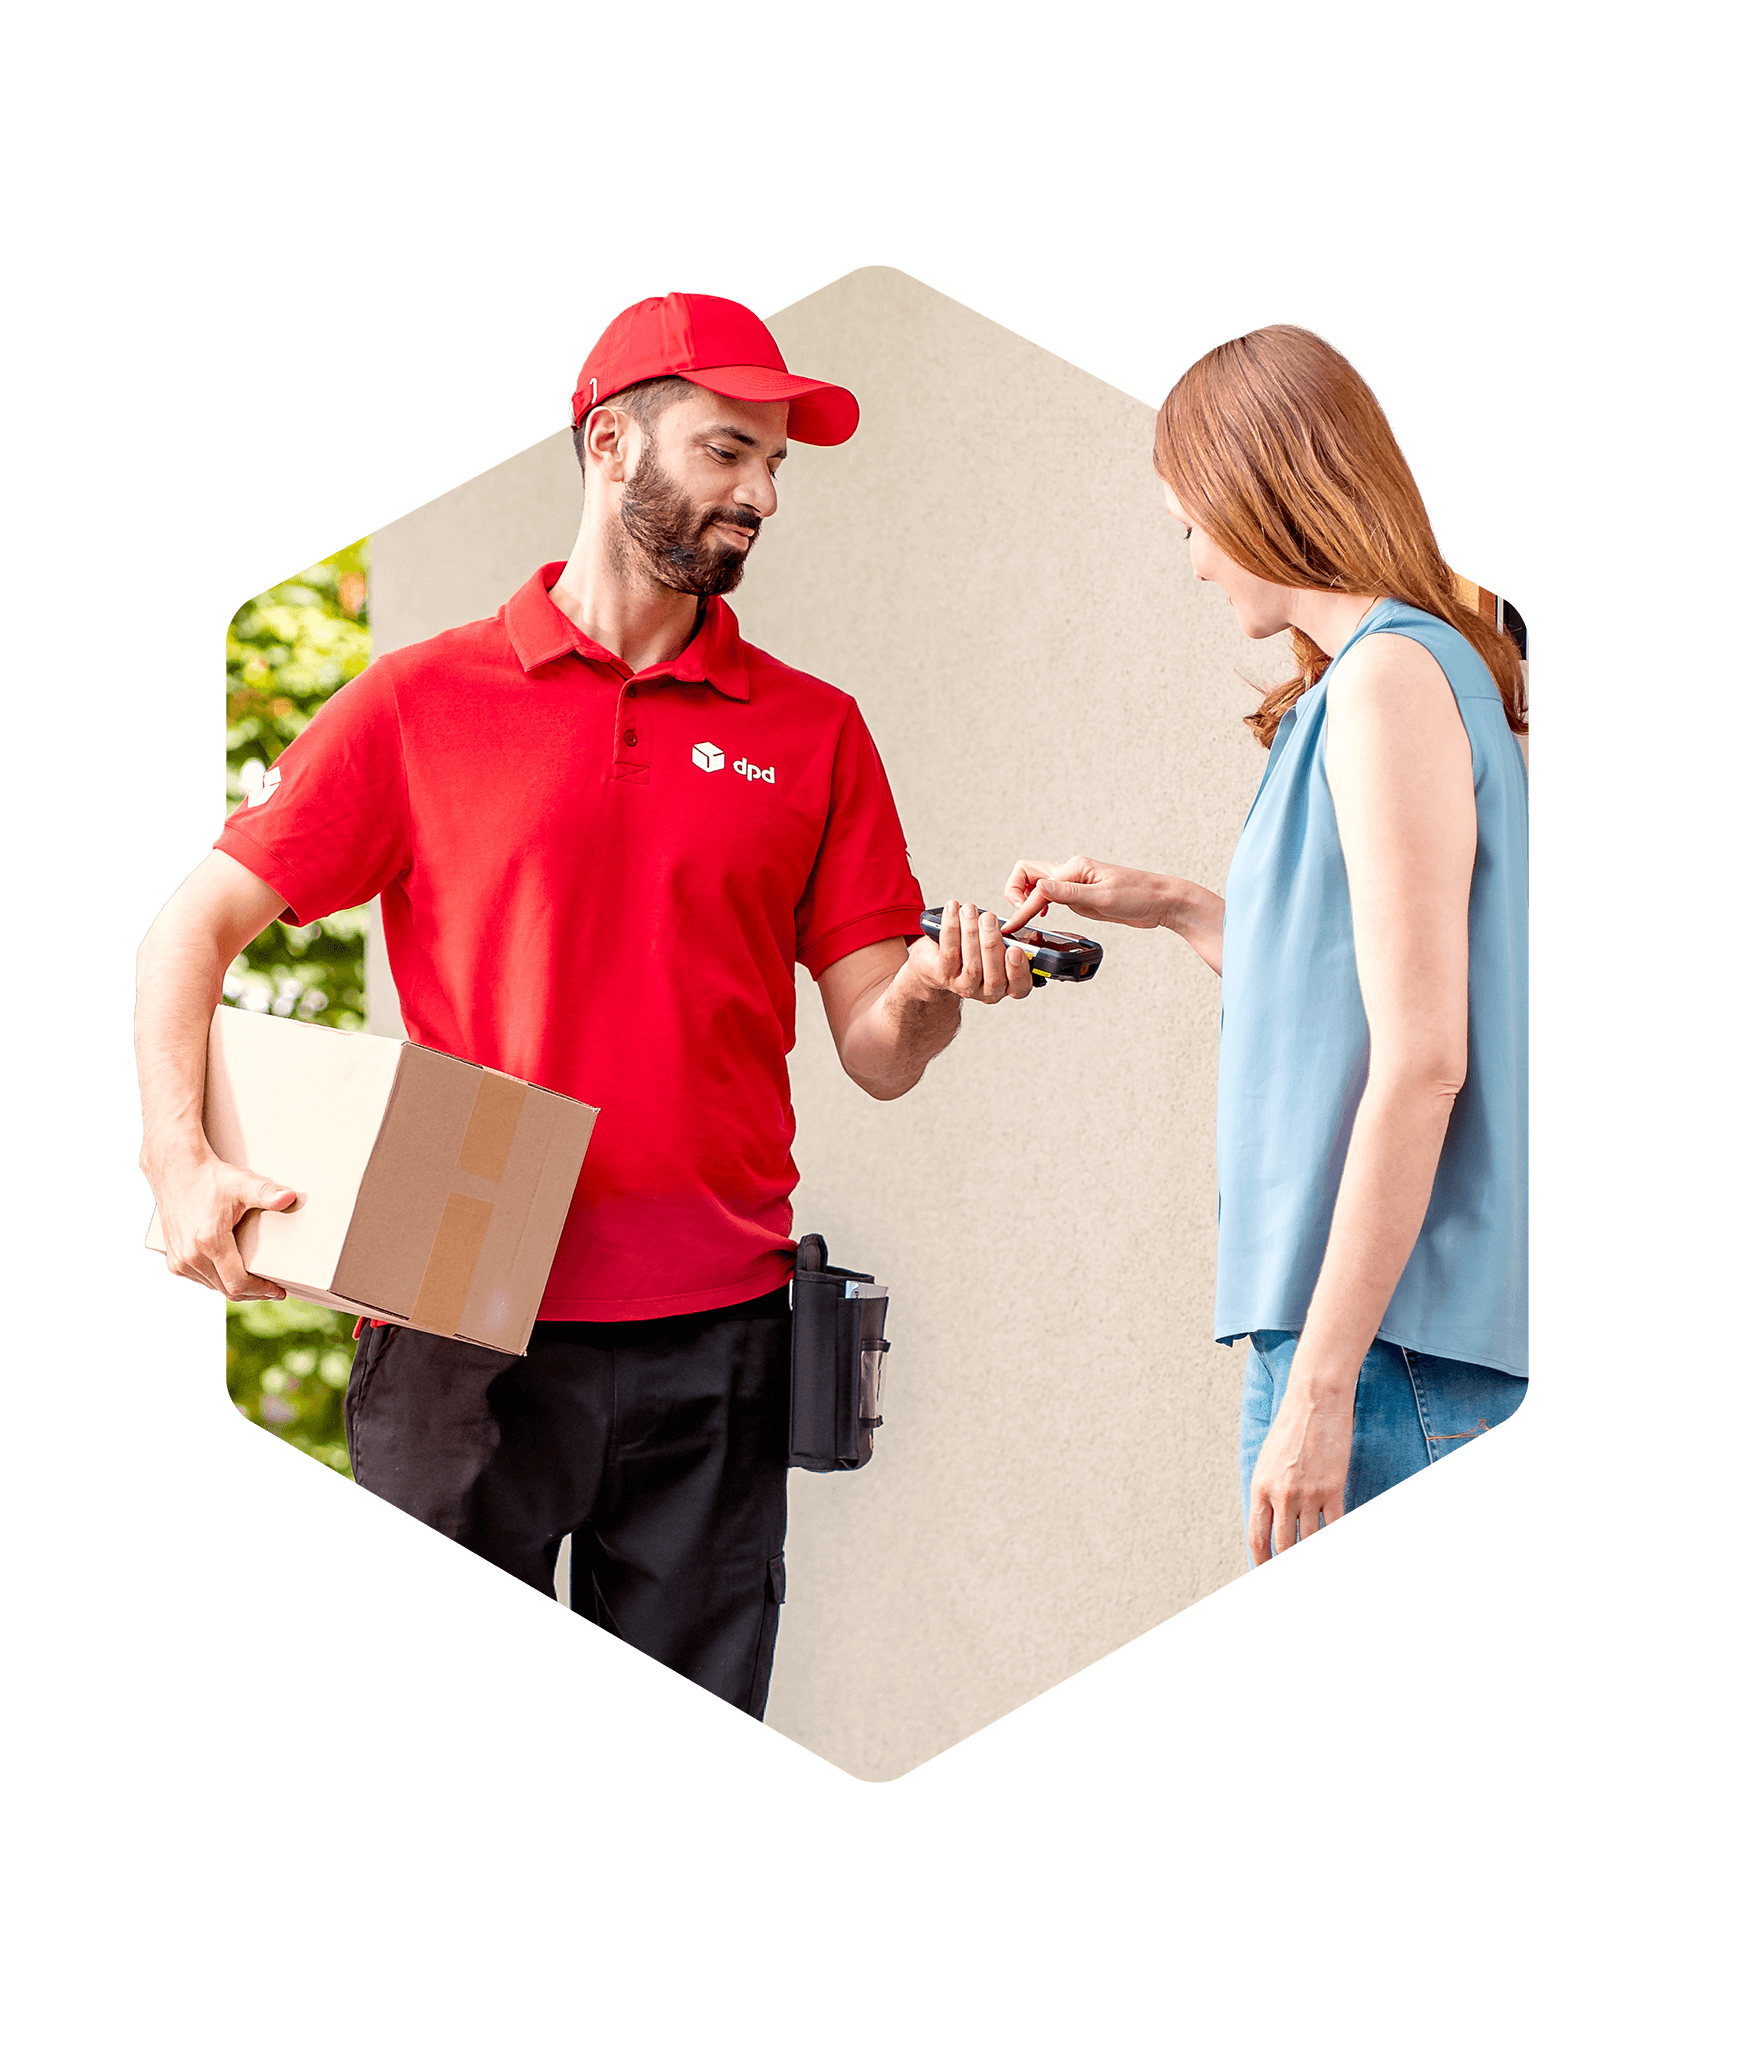 DPD Delivery expert getting a signature from a female customer